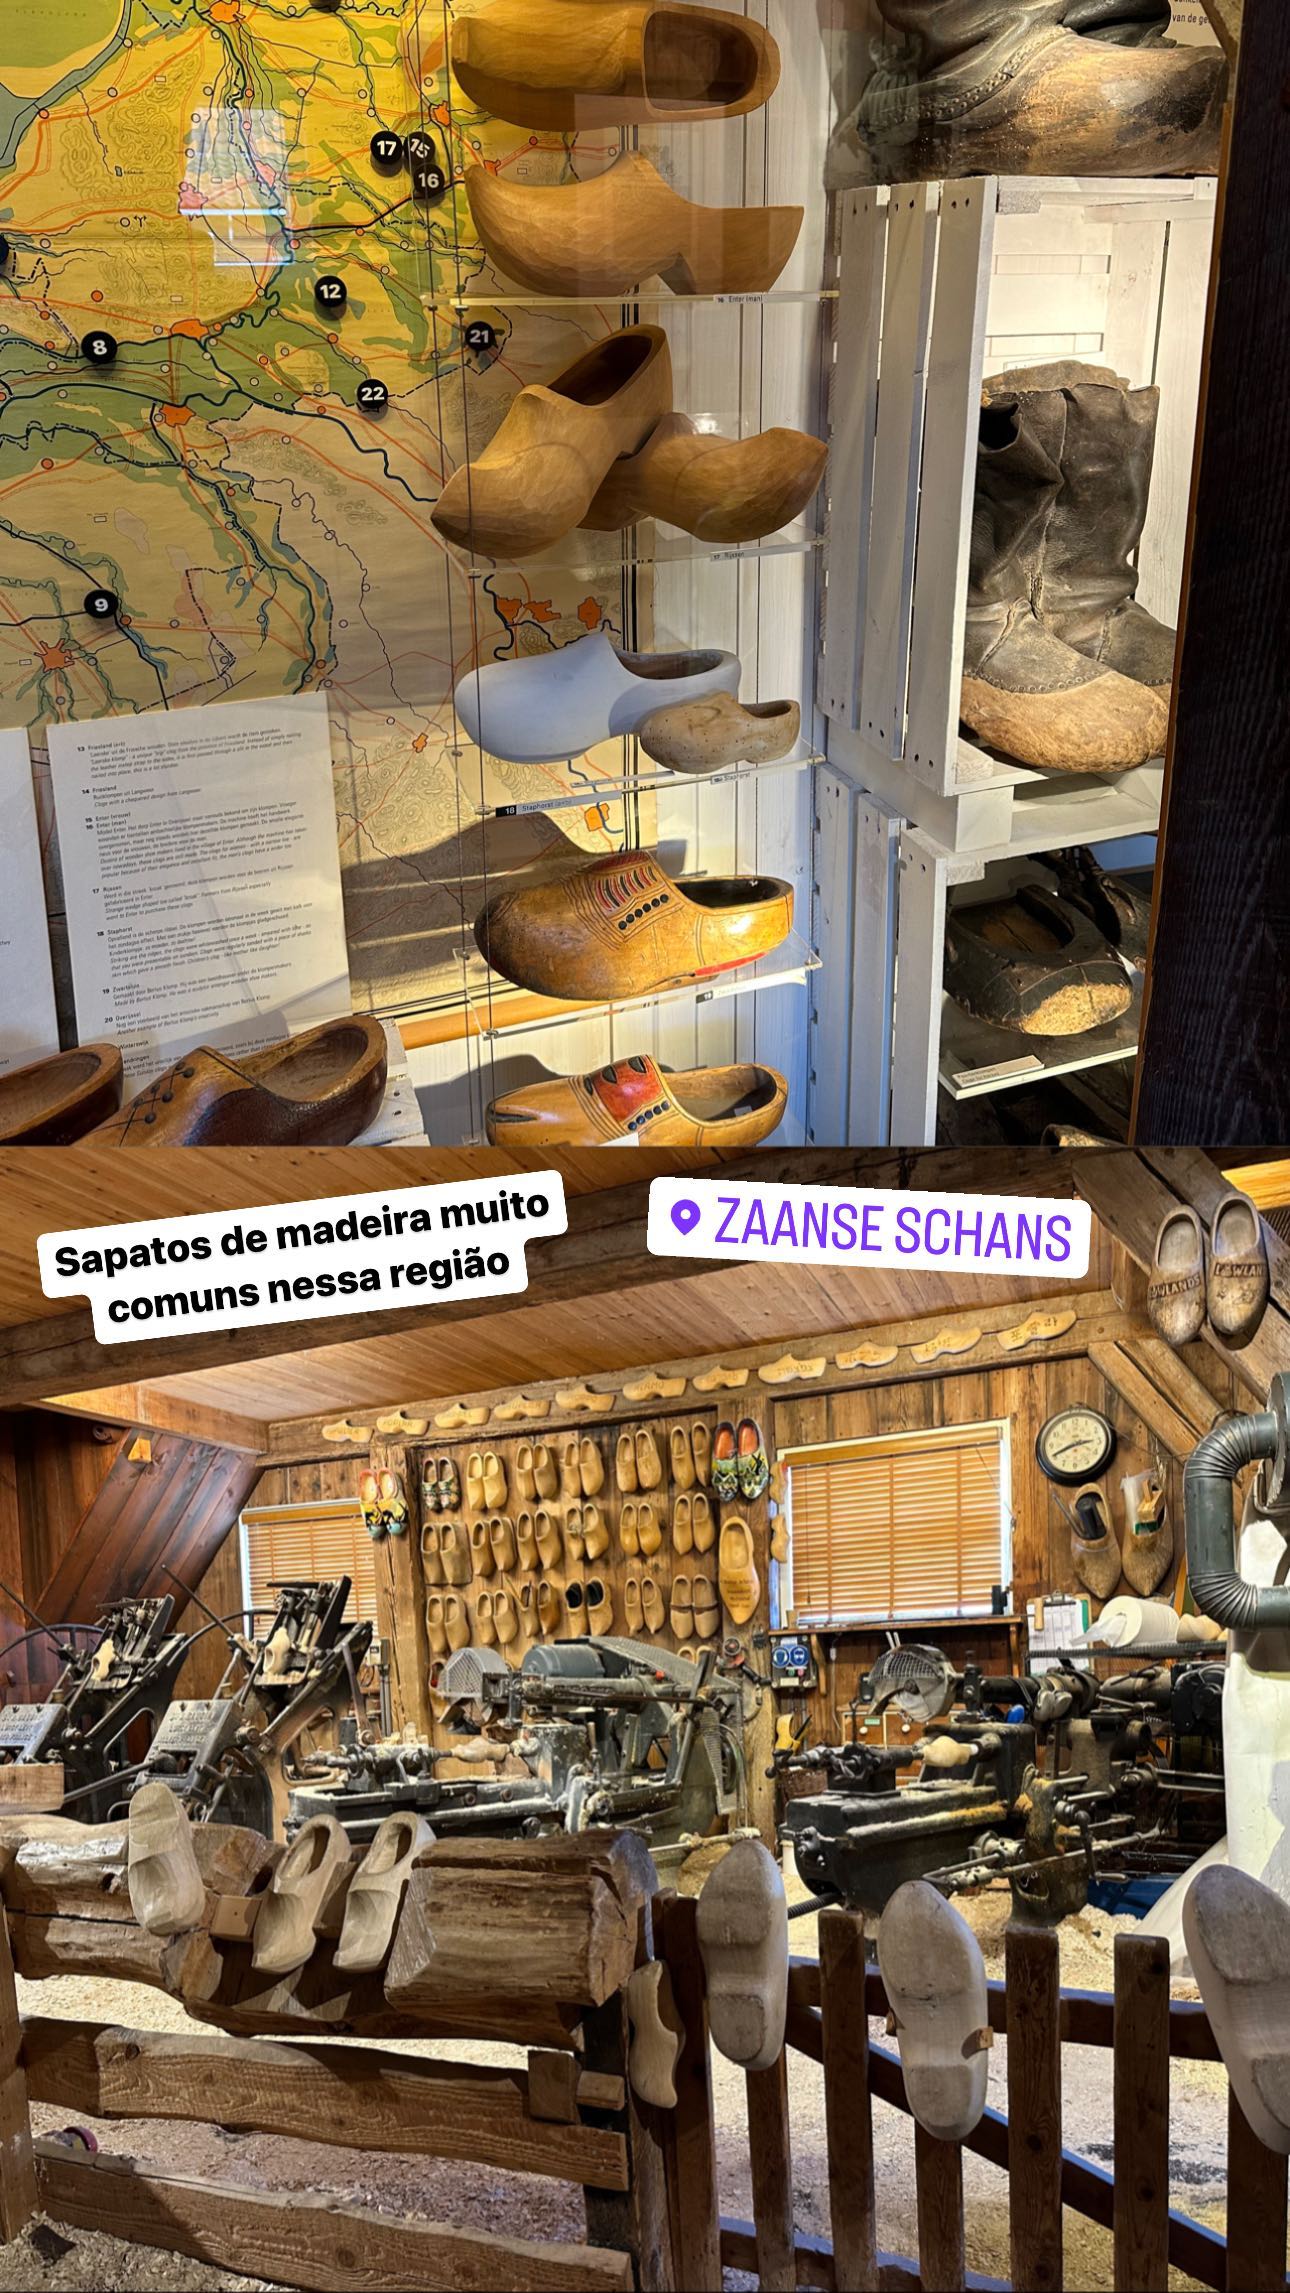 Wooden shoes that are very common in this region